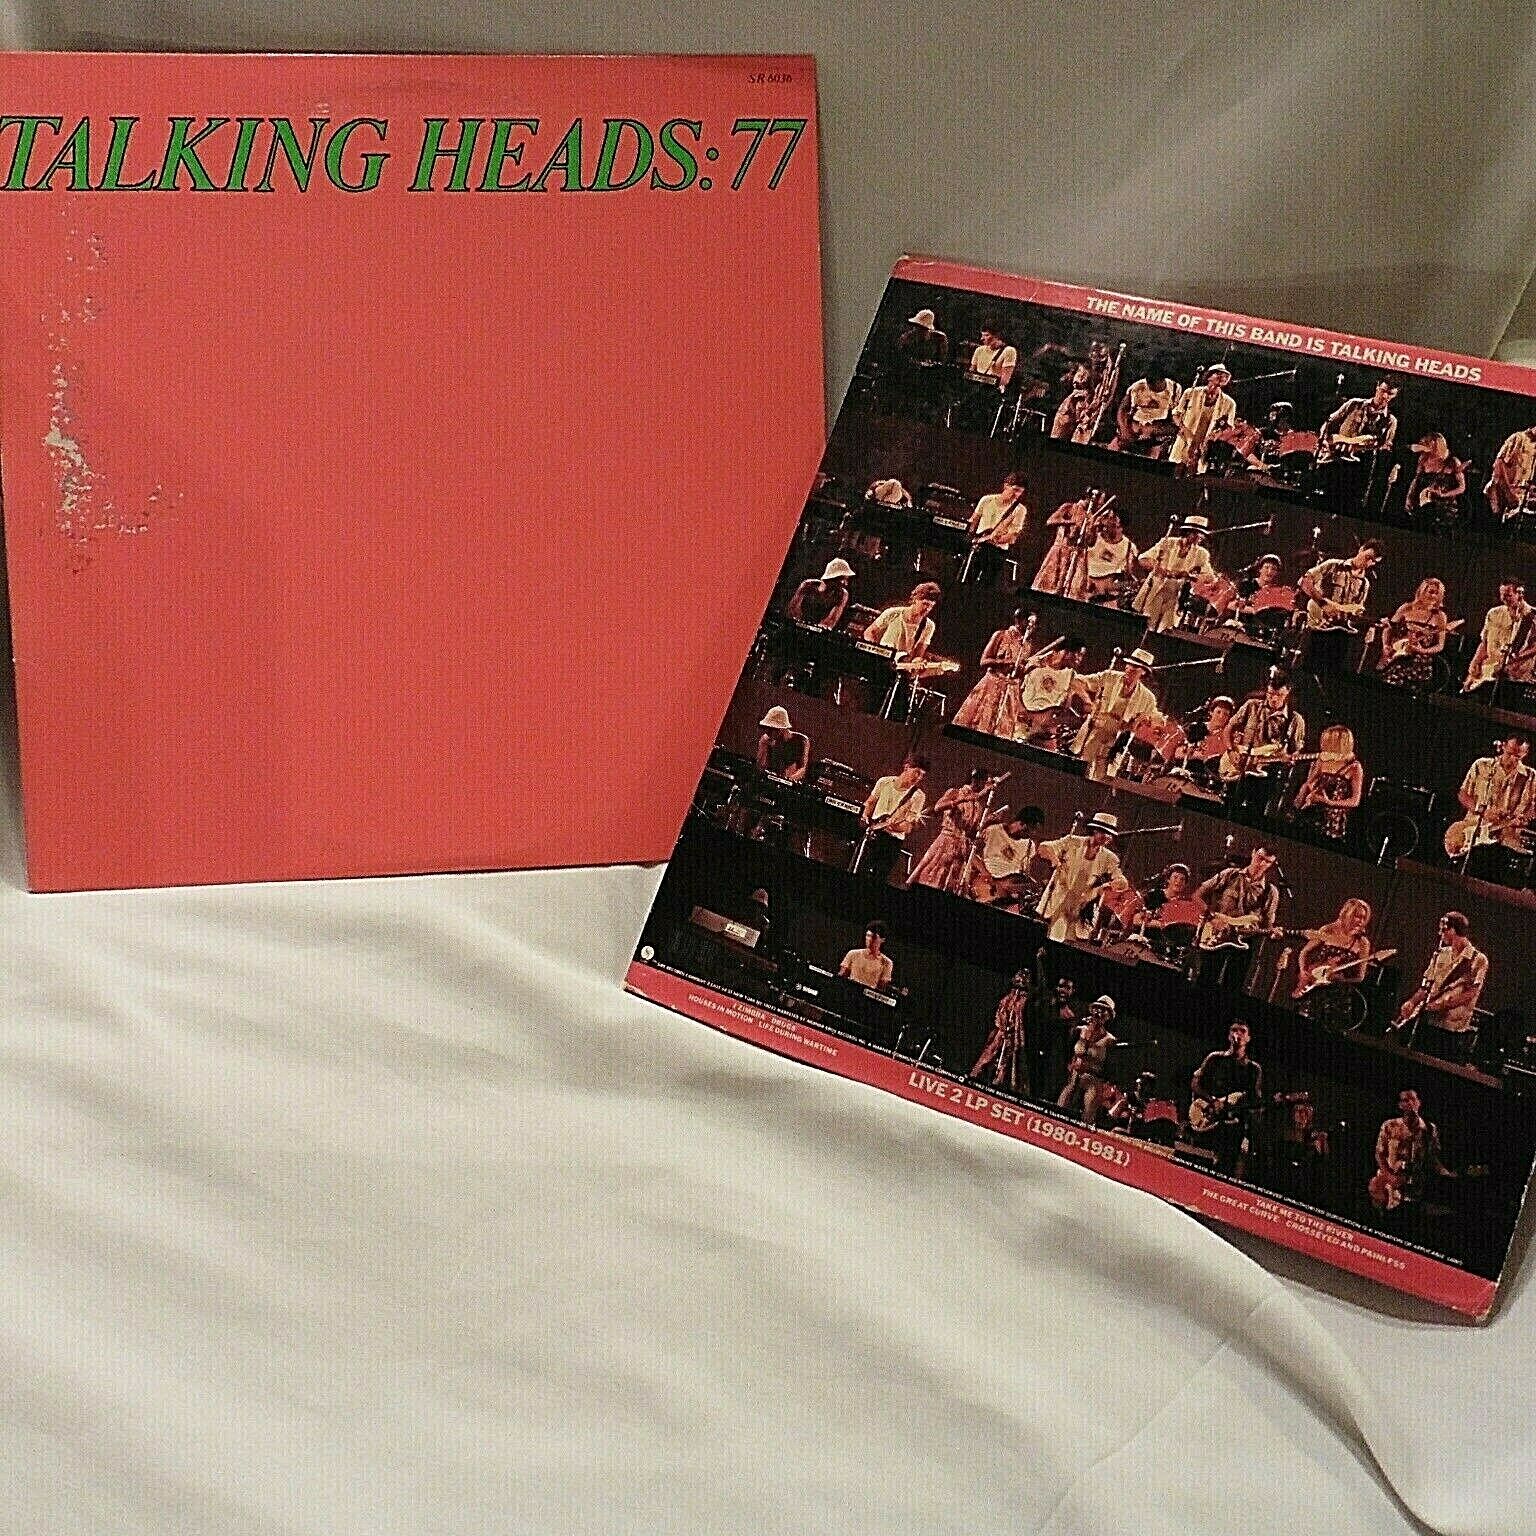 Talking Heads 2 Orig Lp Lot Name Of The Band Is Talking Heads 2xlp And 77 Ex